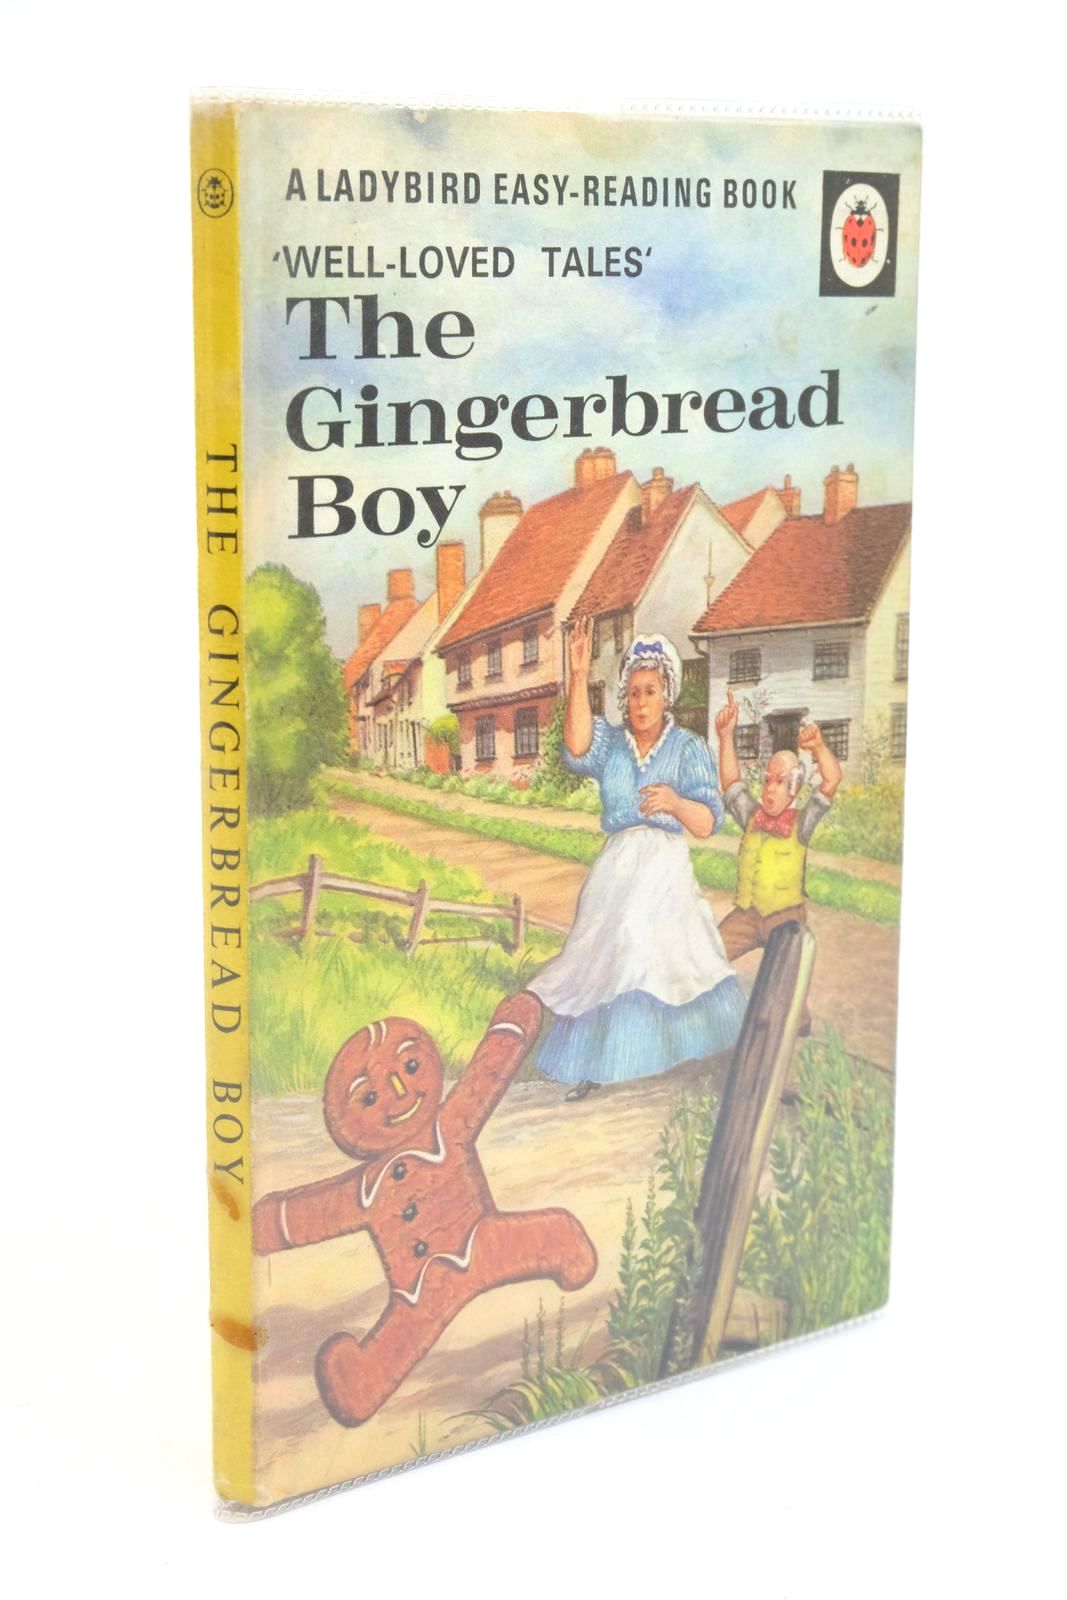 Photo of THE GINGERBREAD BOY written by Southgate, Vera illustrated by Lumley, Robert published by Wills & Hepworth Ltd. (STOCK CODE: 1322383)  for sale by Stella & Rose's Books